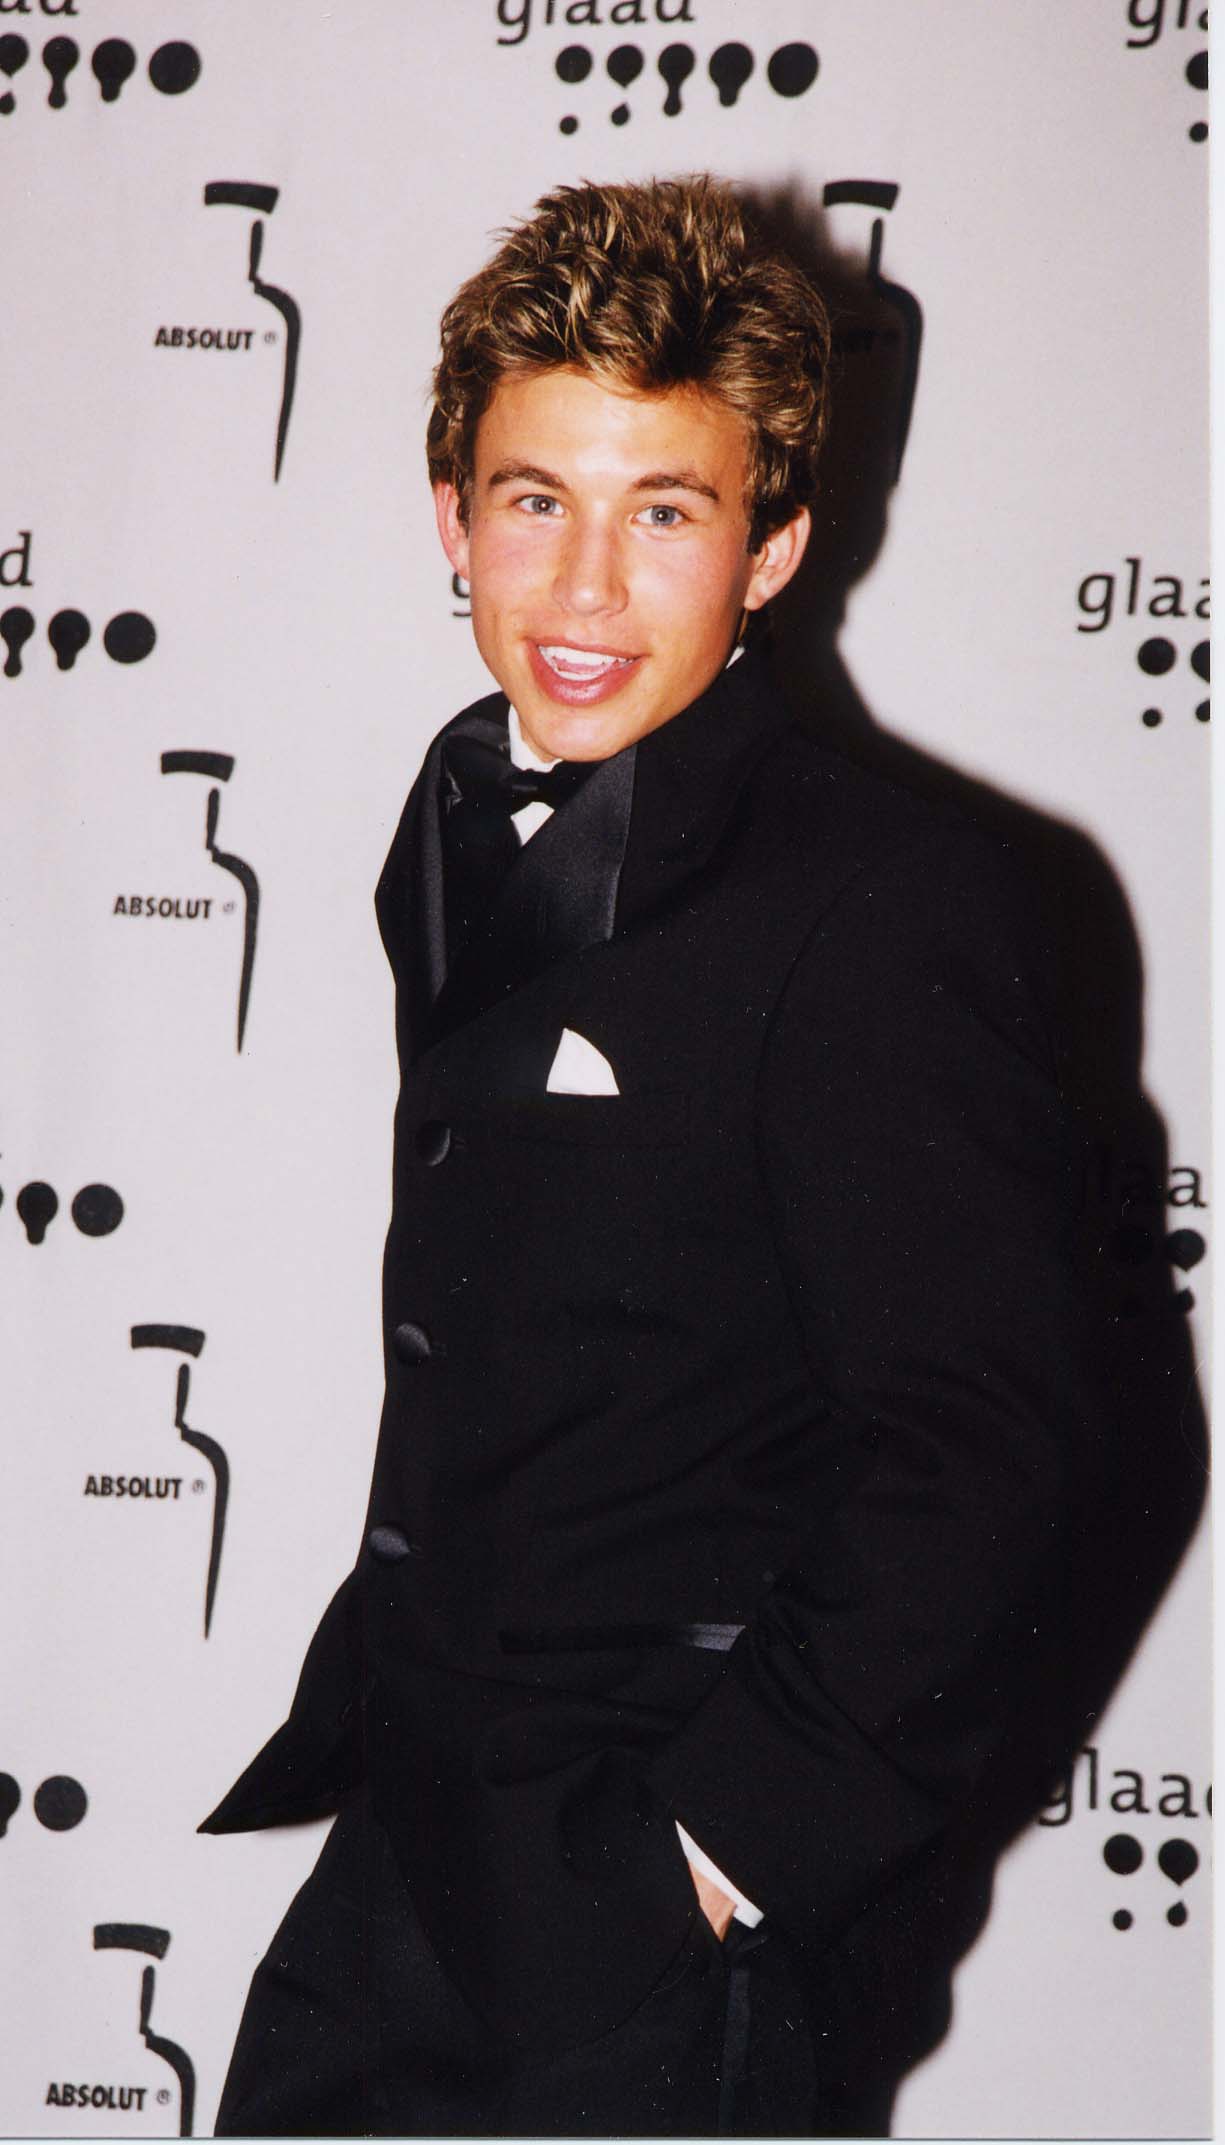 Jonathan Taylor Thomas during the GLAAD Media Awards on April 15, 2000 in Los Angeles, California | Source: Getty Images